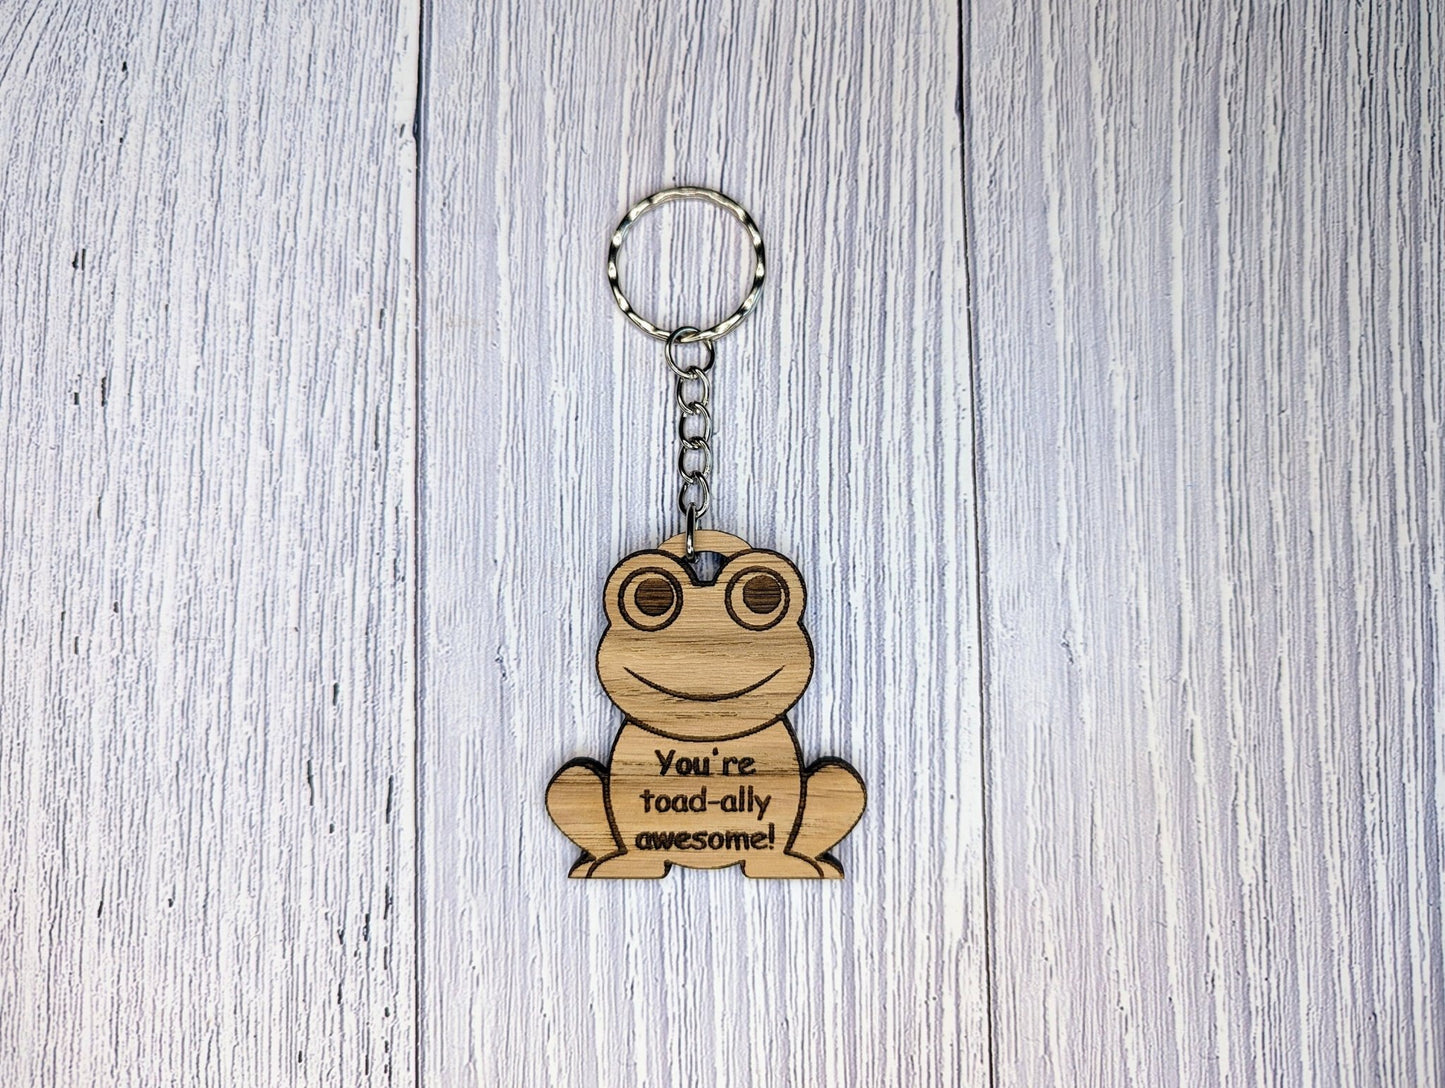 Wooden Frog Keyring | You're toad-ally awesome! | Bag Tag | Can Be Personalised | Oak Veneered MDF - CherryGroveCraft